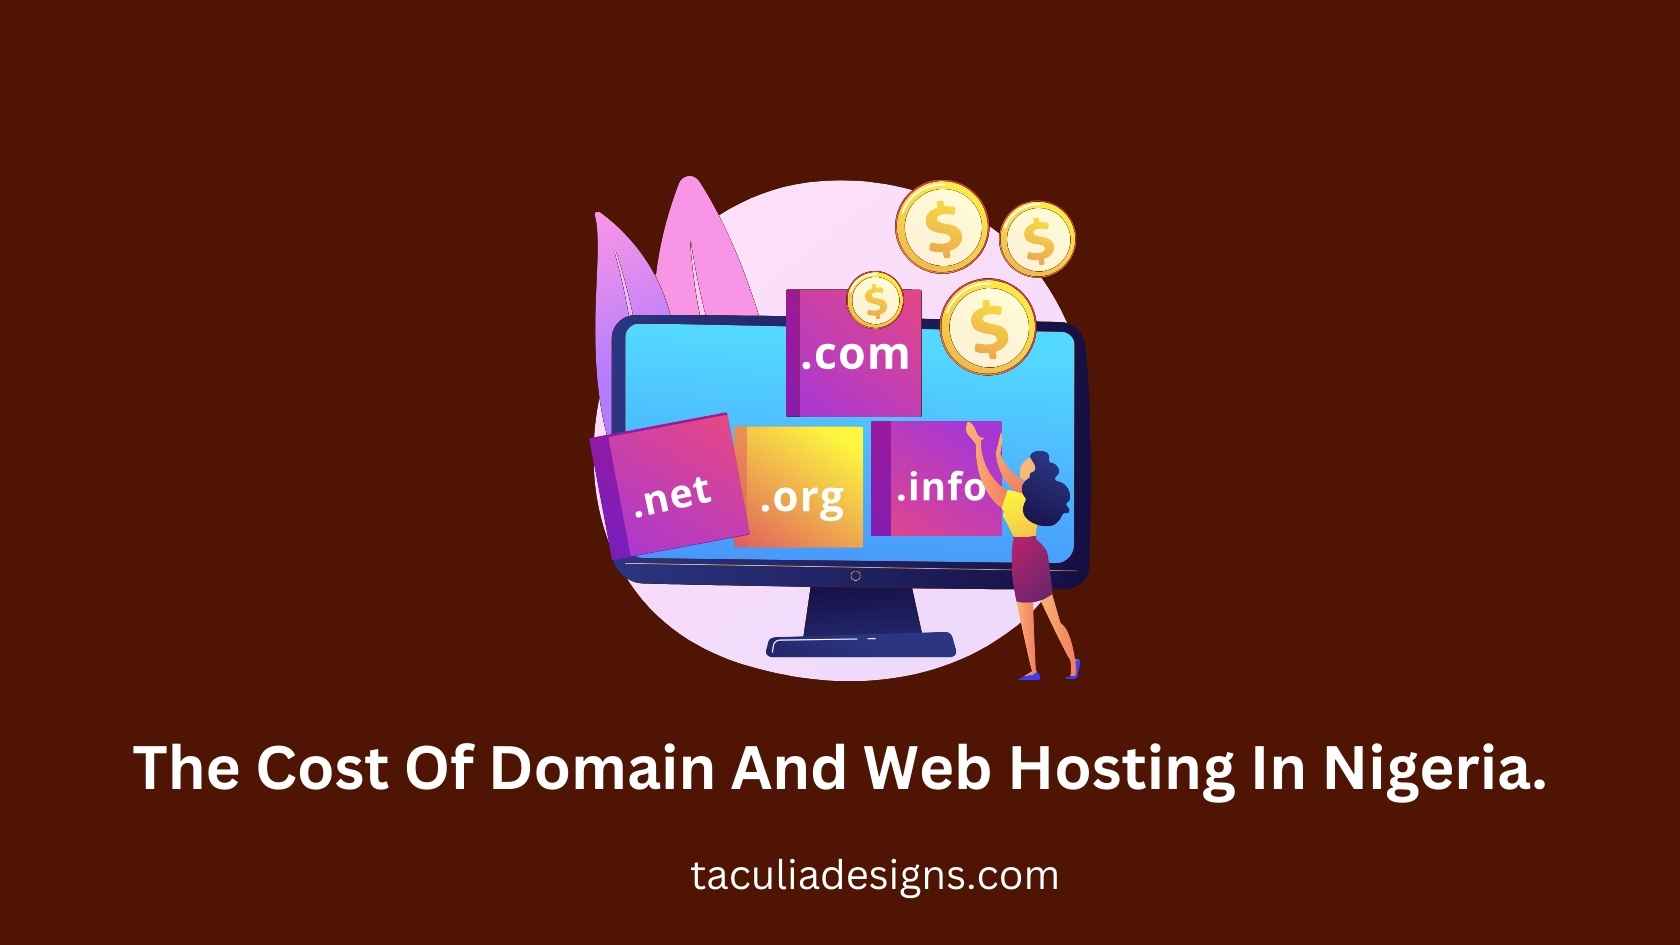 The Cost Of Domain And Web Hosting In Nigeria.